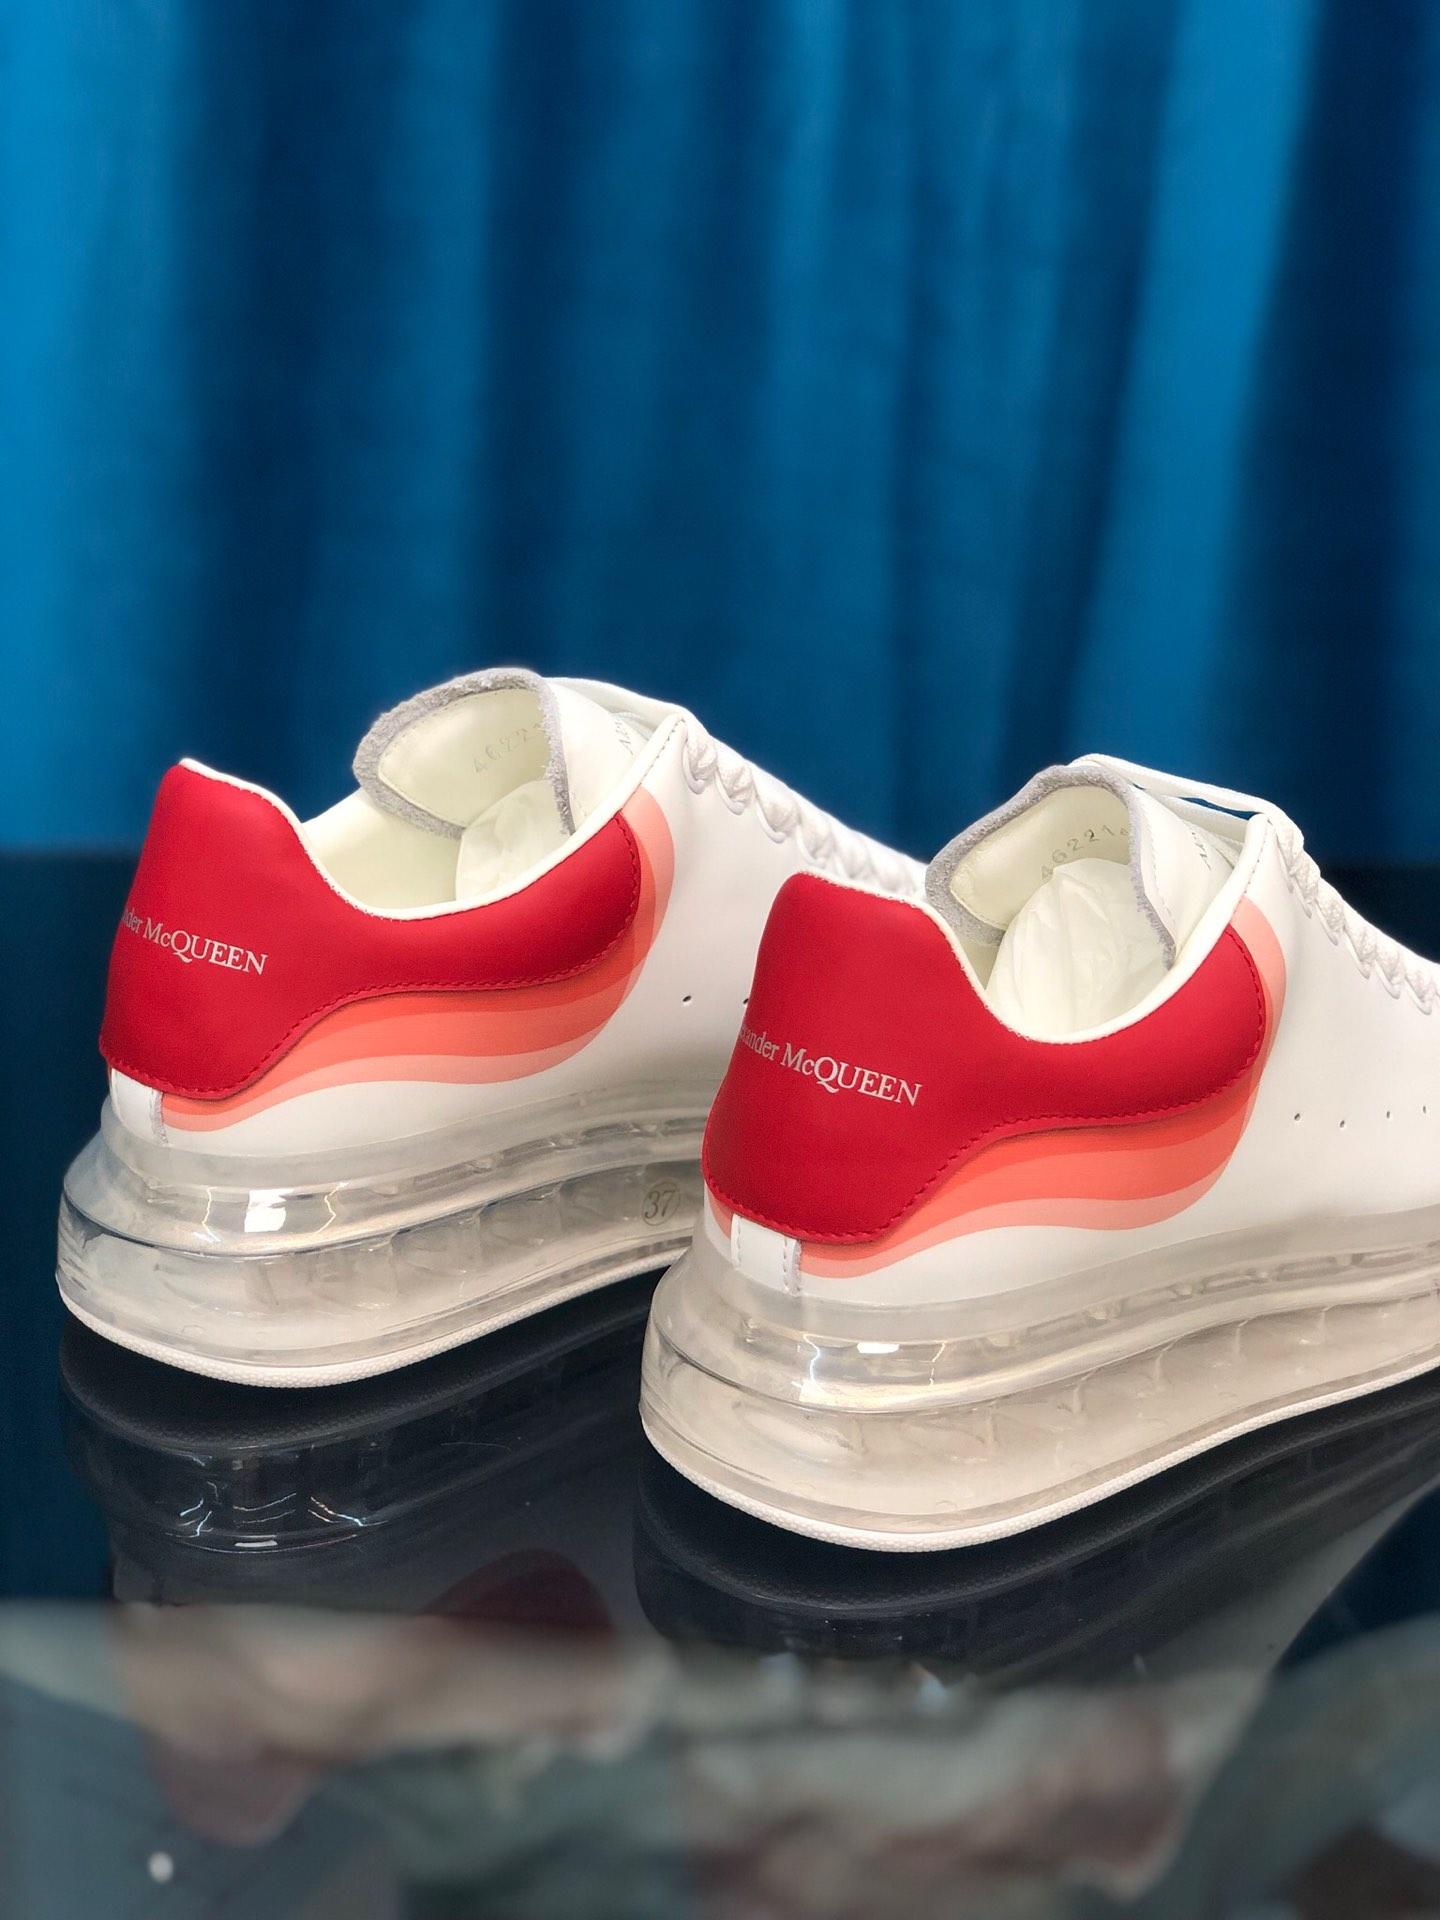 Alexander McQueen Fahion Sneaker White and red heel with transparent sole MS100022